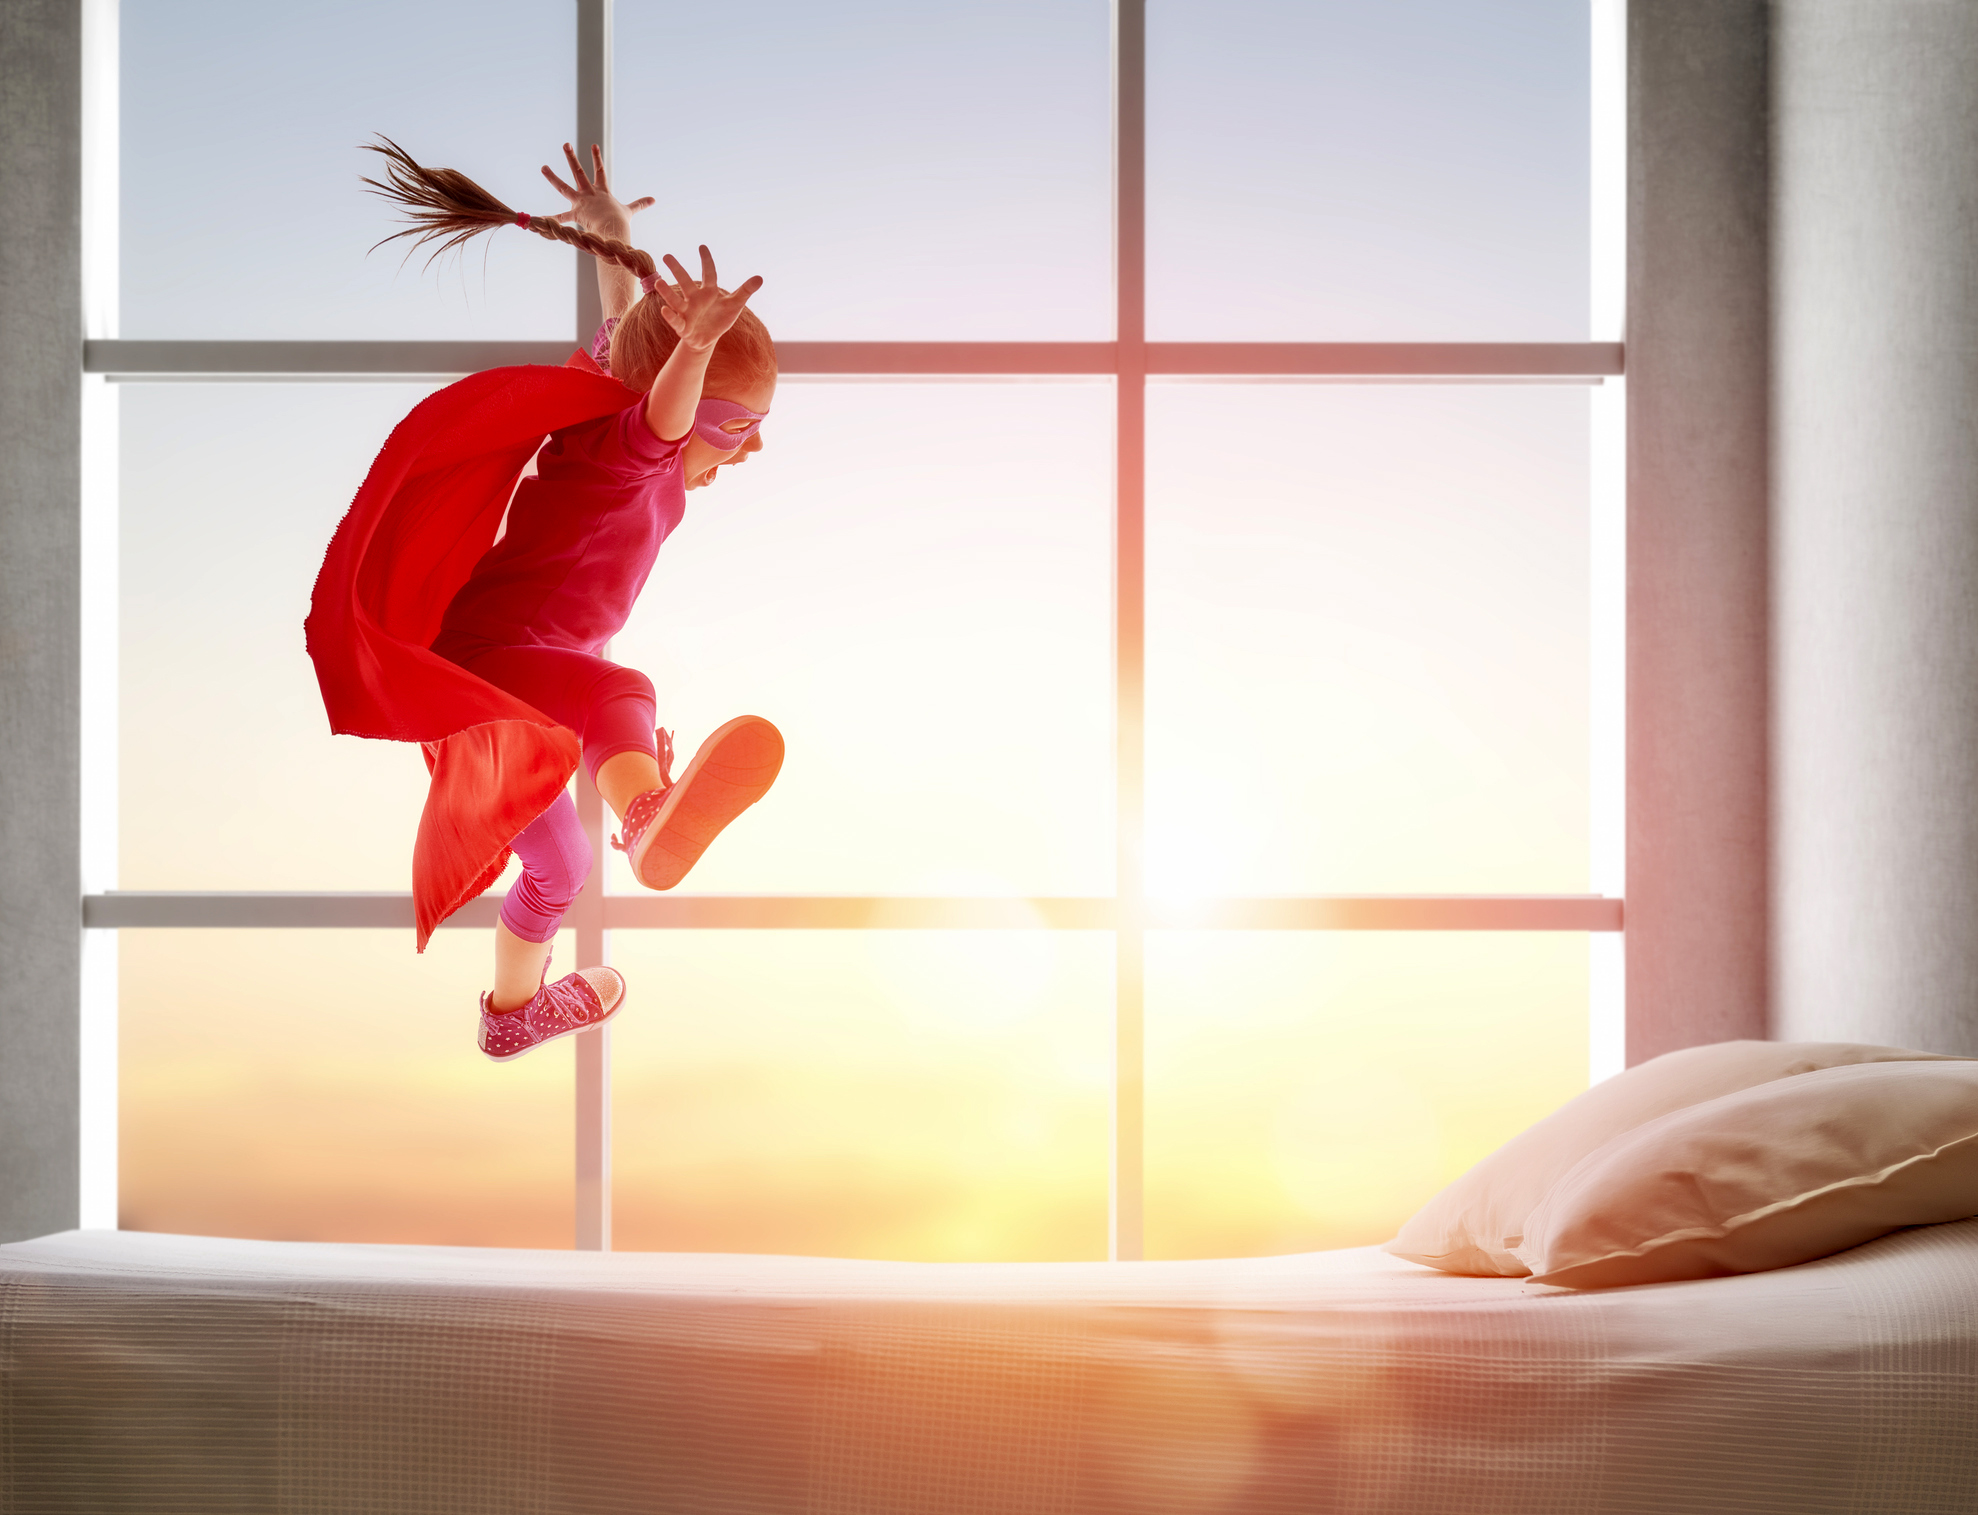 A girl jumping on a bed.